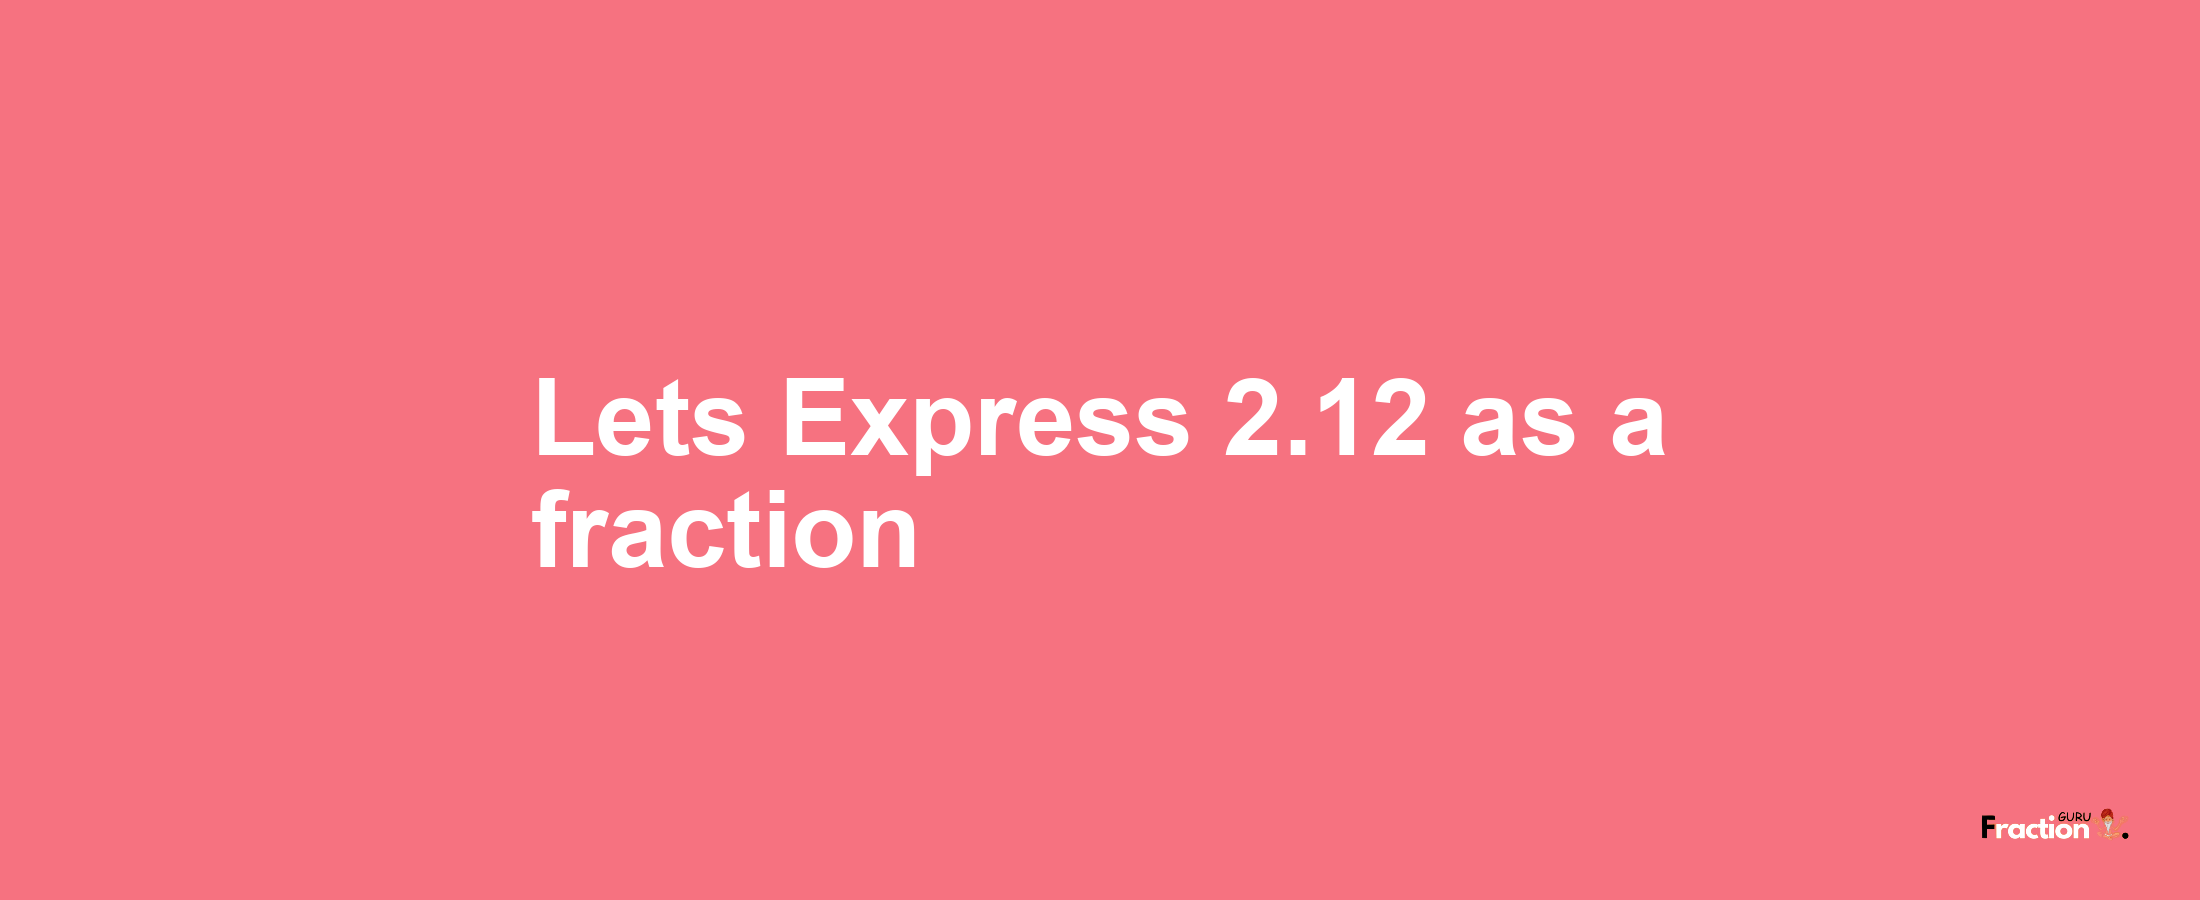 Lets Express 2.12 as afraction